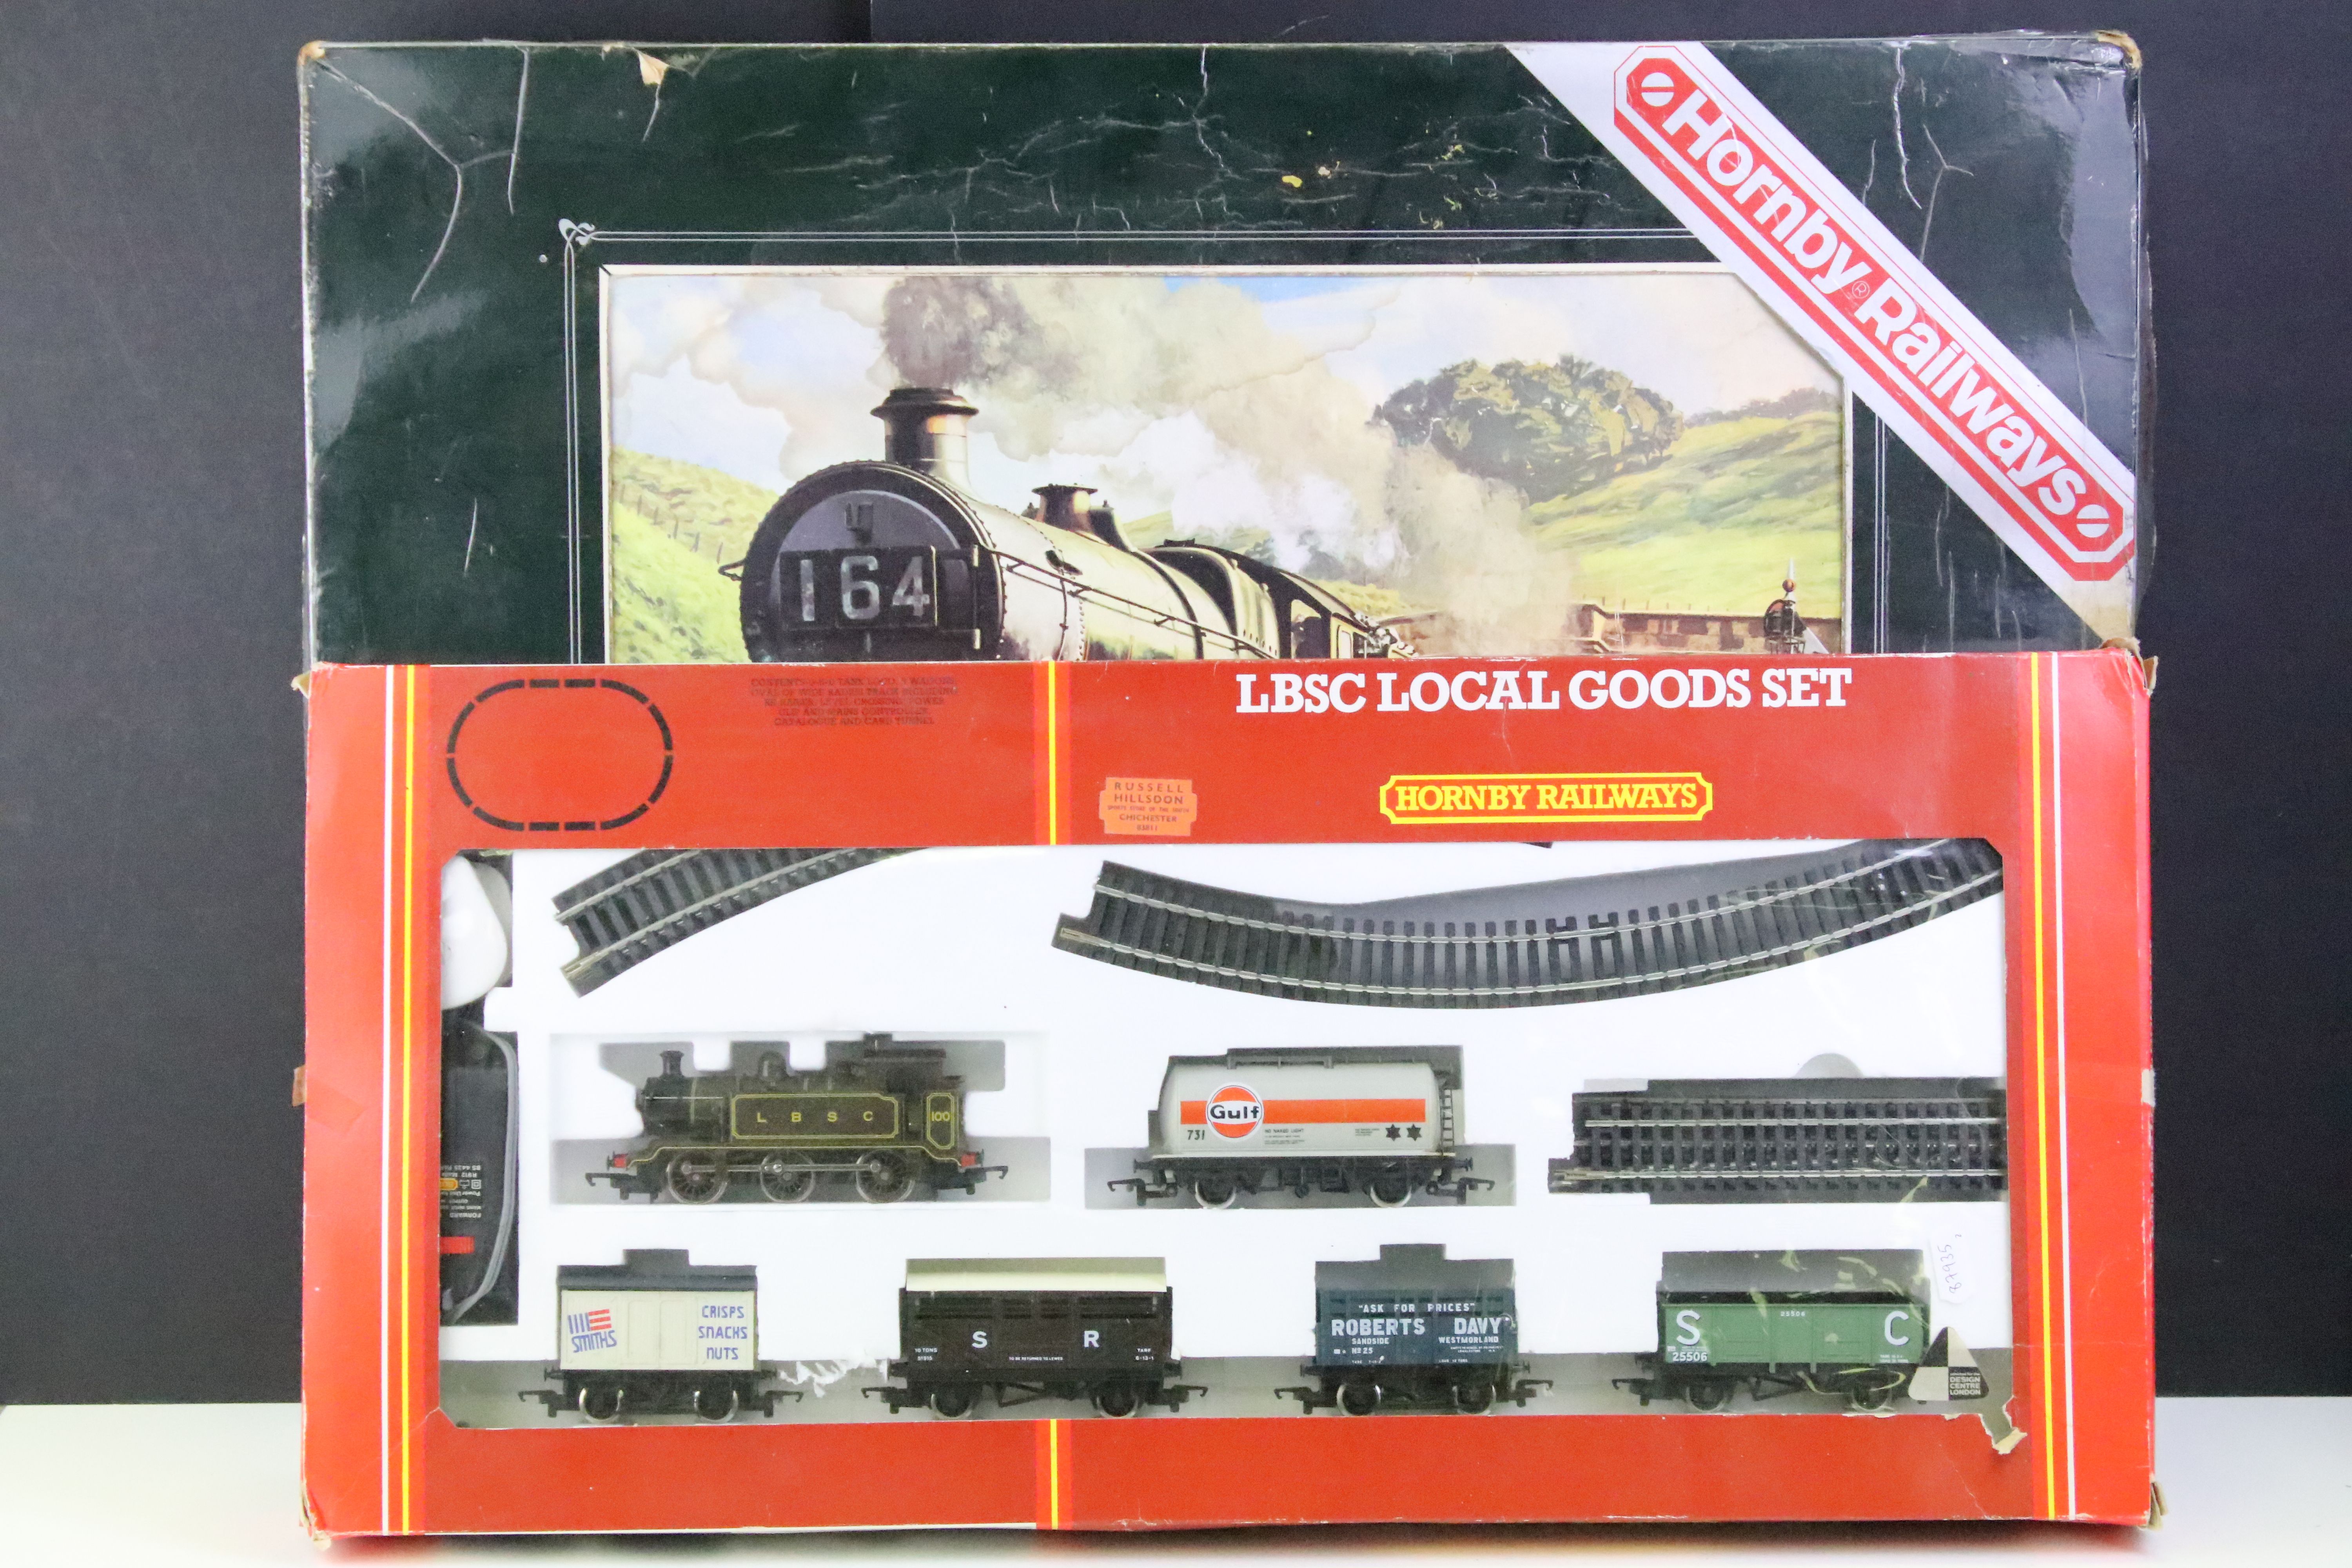 Two boxed Hornby OO gauge train sets to include R536 LBSC Local Goods Set and R687 Silver Jubilee